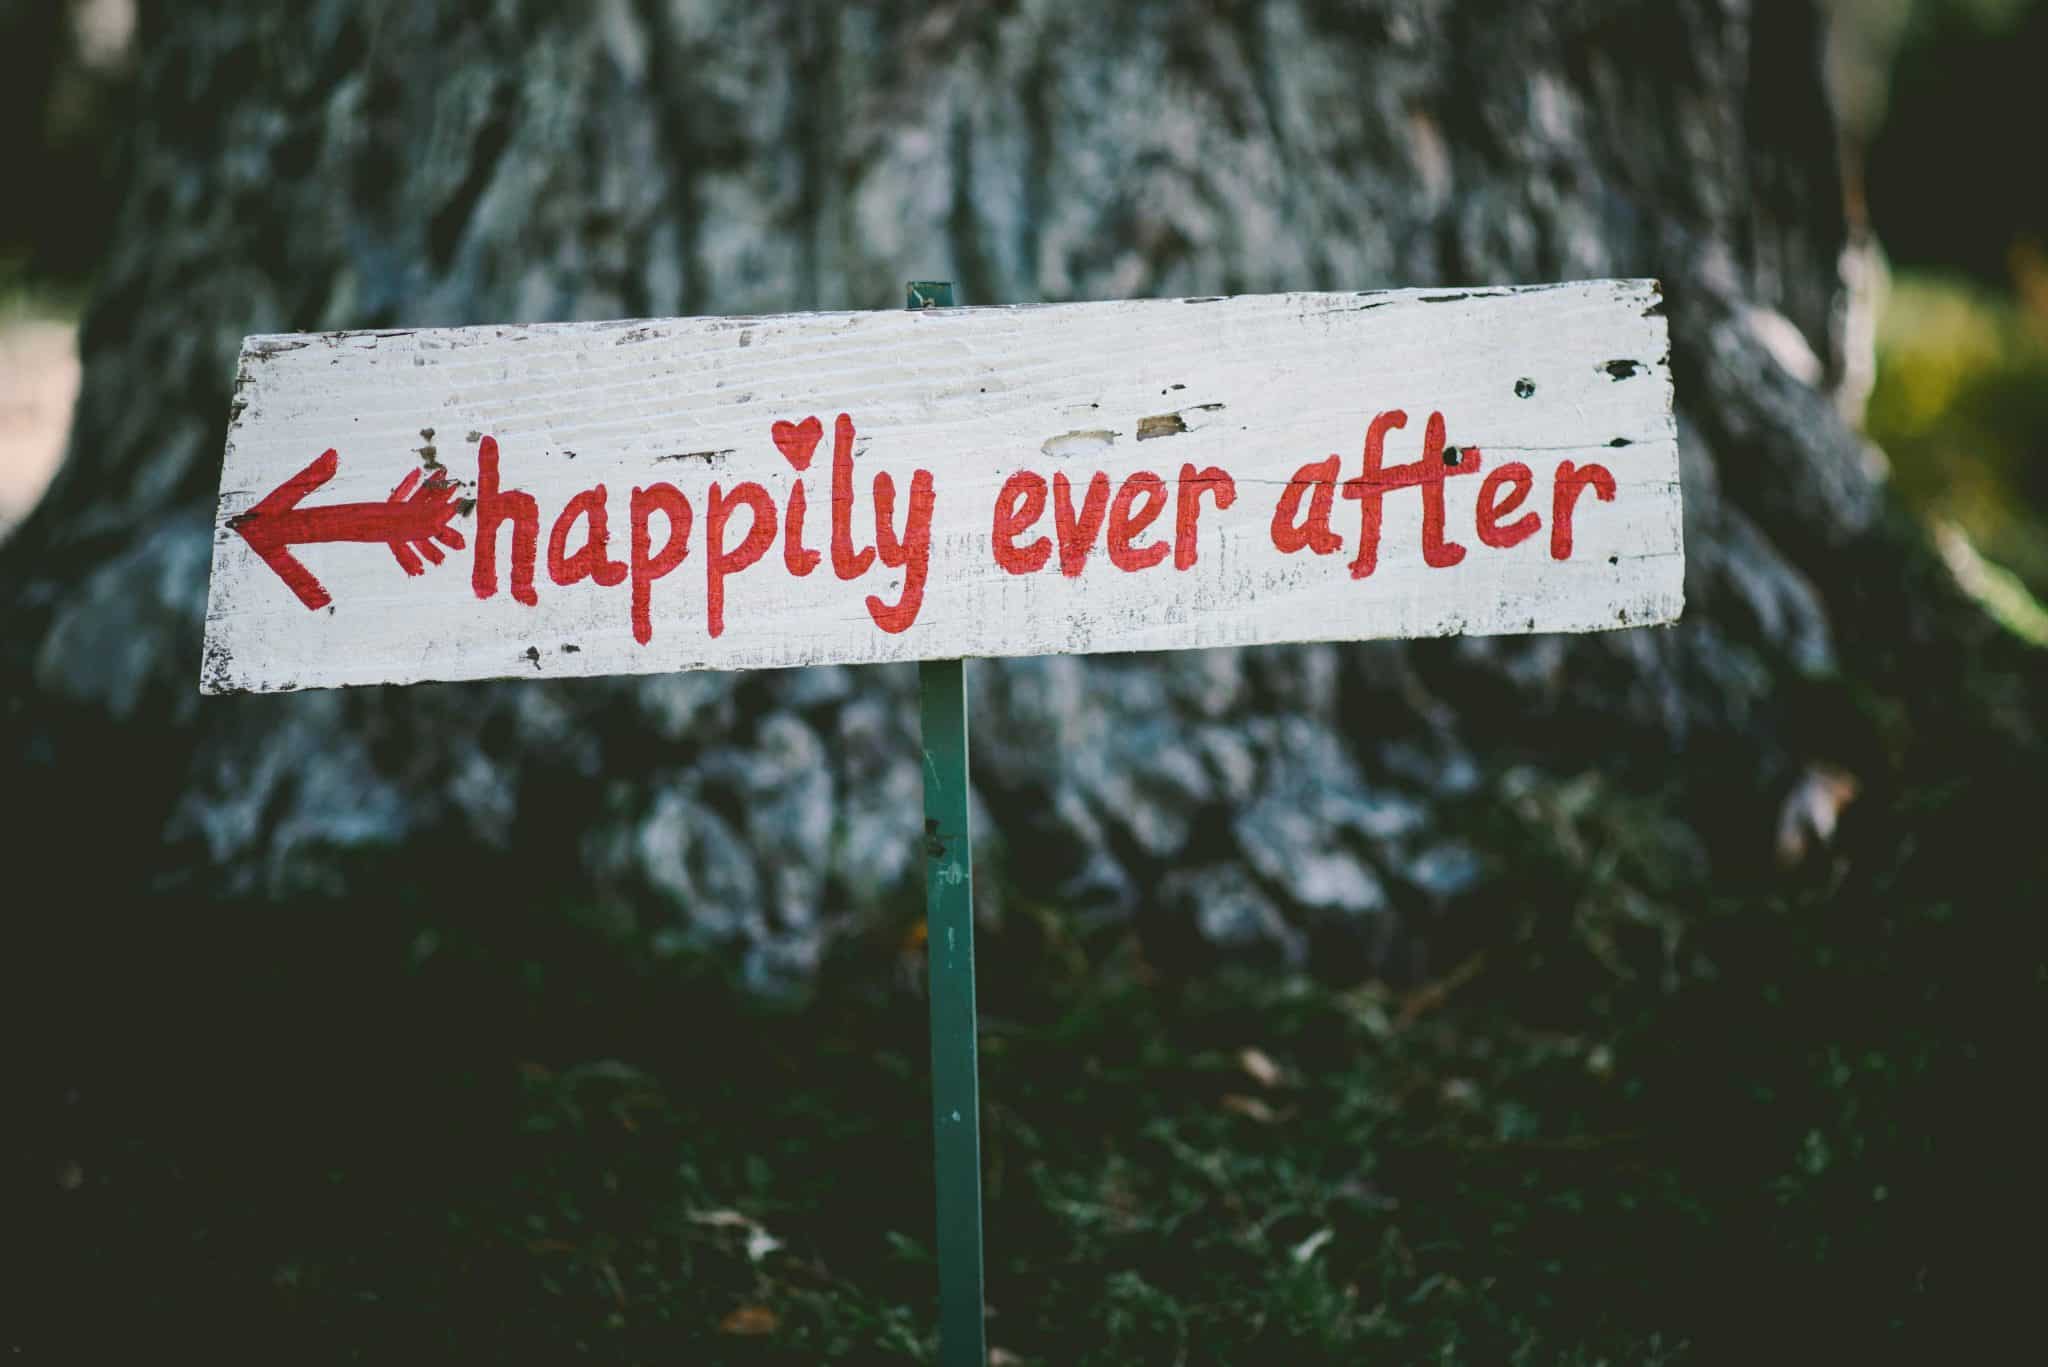 sign reading "happily ever after"